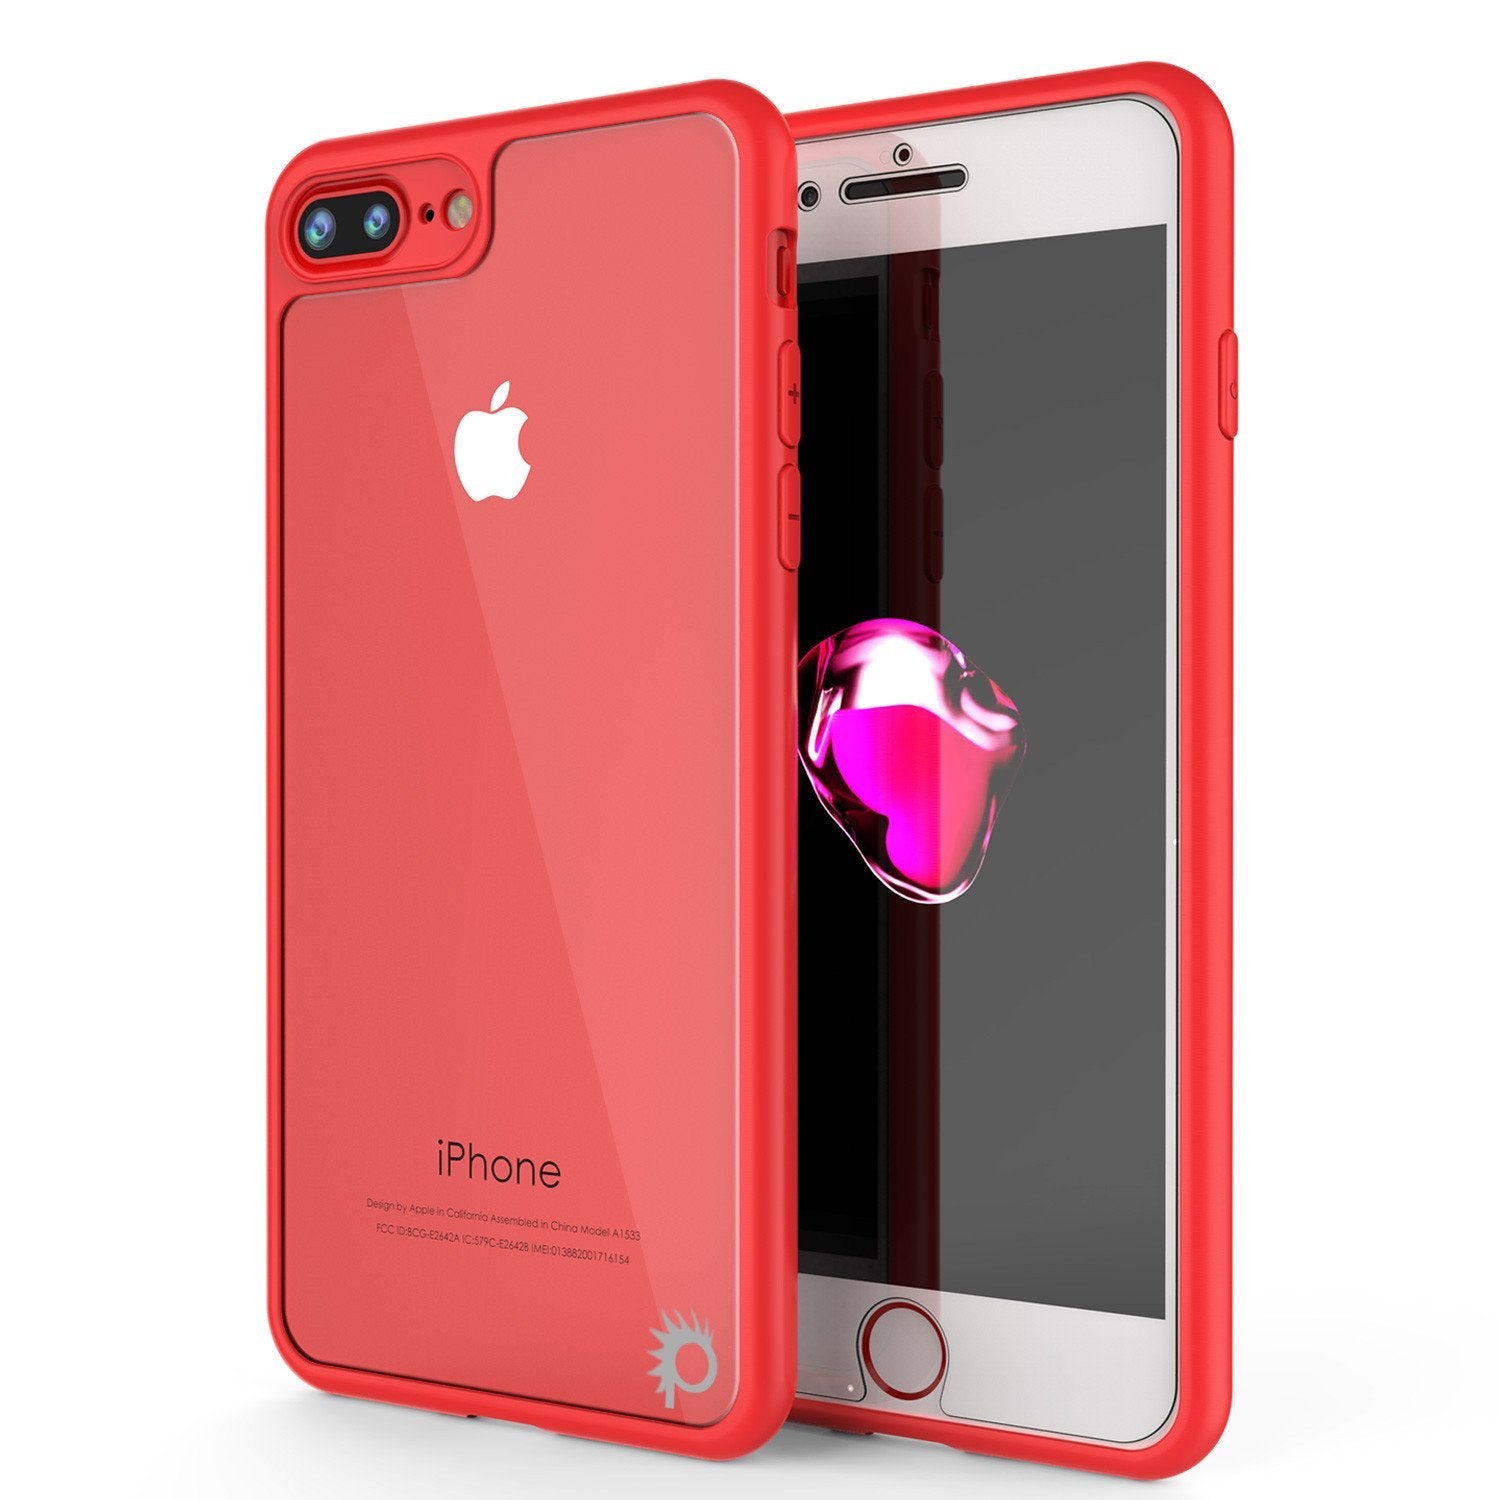 iPhone 8+ Plus Case [MASK Series] [RED] Full Body Hybrid Dual Layer TPU Cover W/ protective Tempered Glass Screen Protector (Color in image: red)